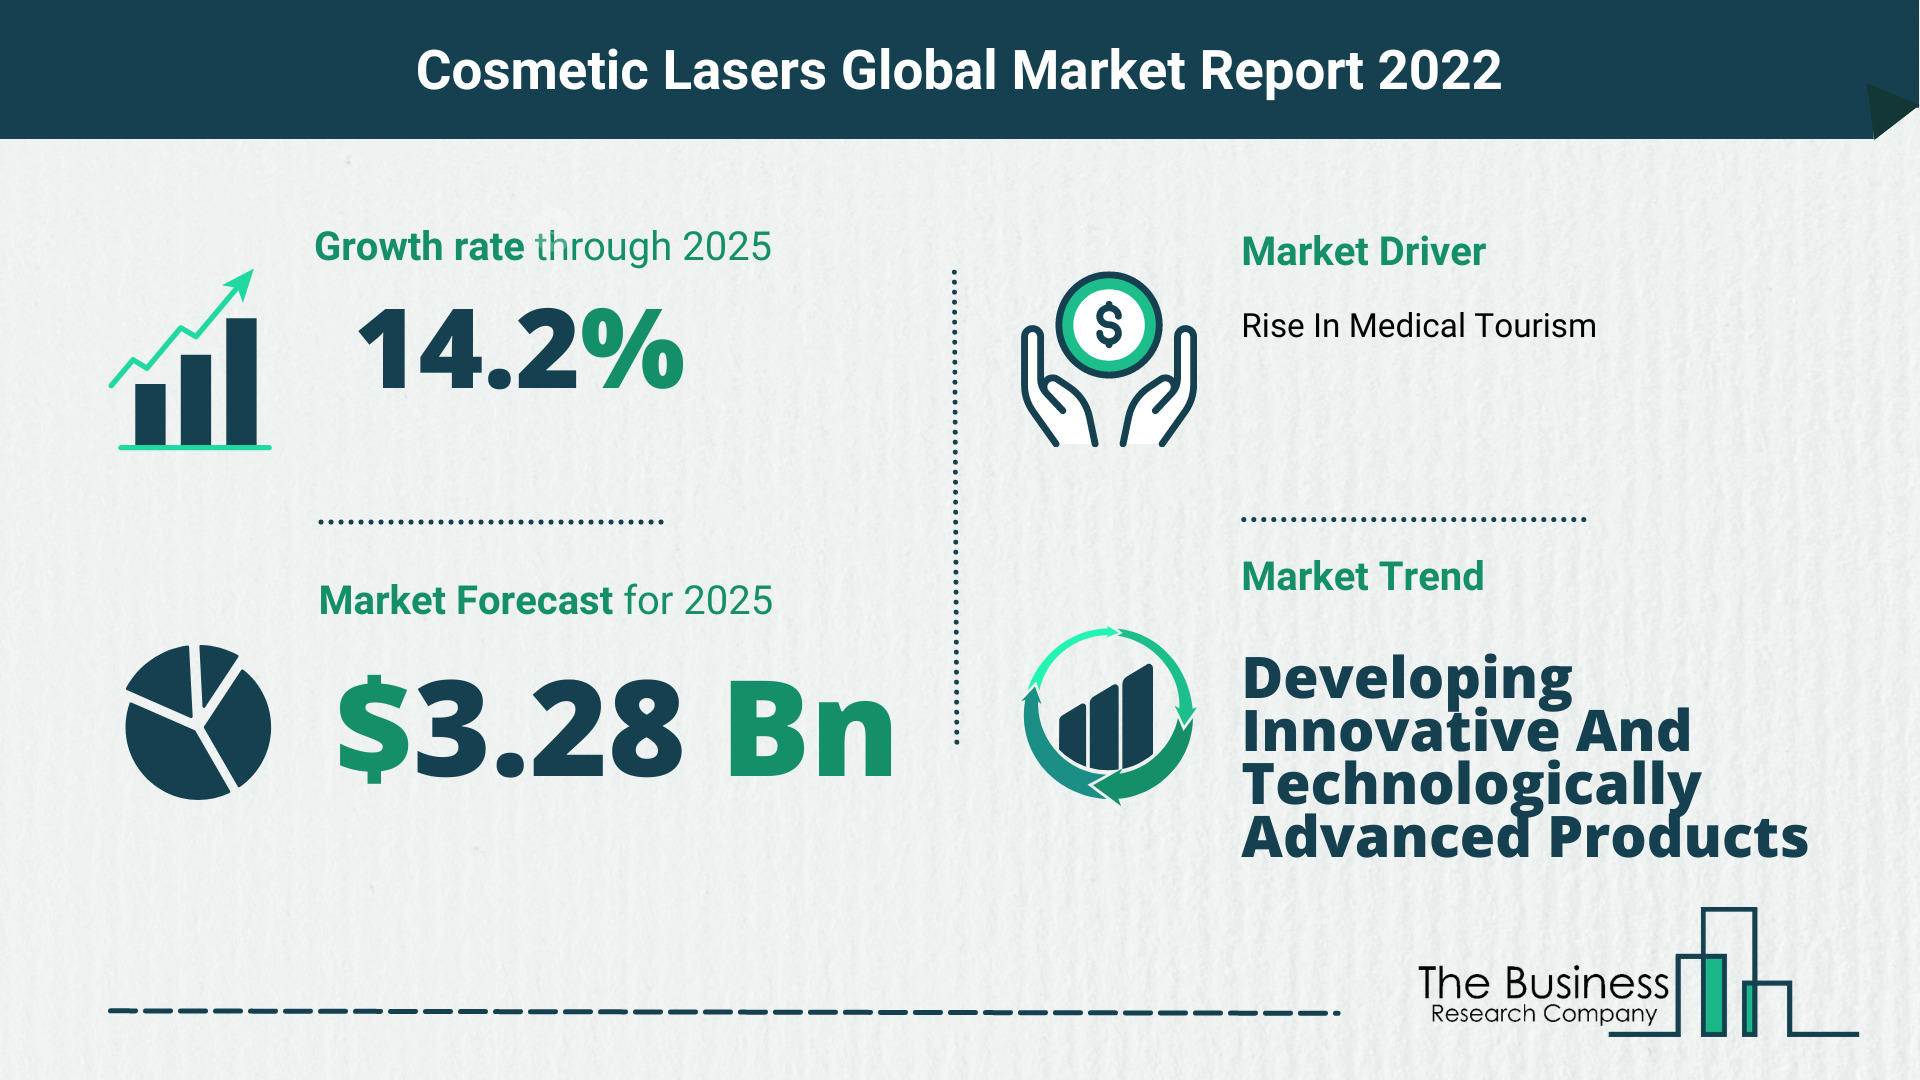 How Will The Cosmetic Lasers Market Grow In 2022?